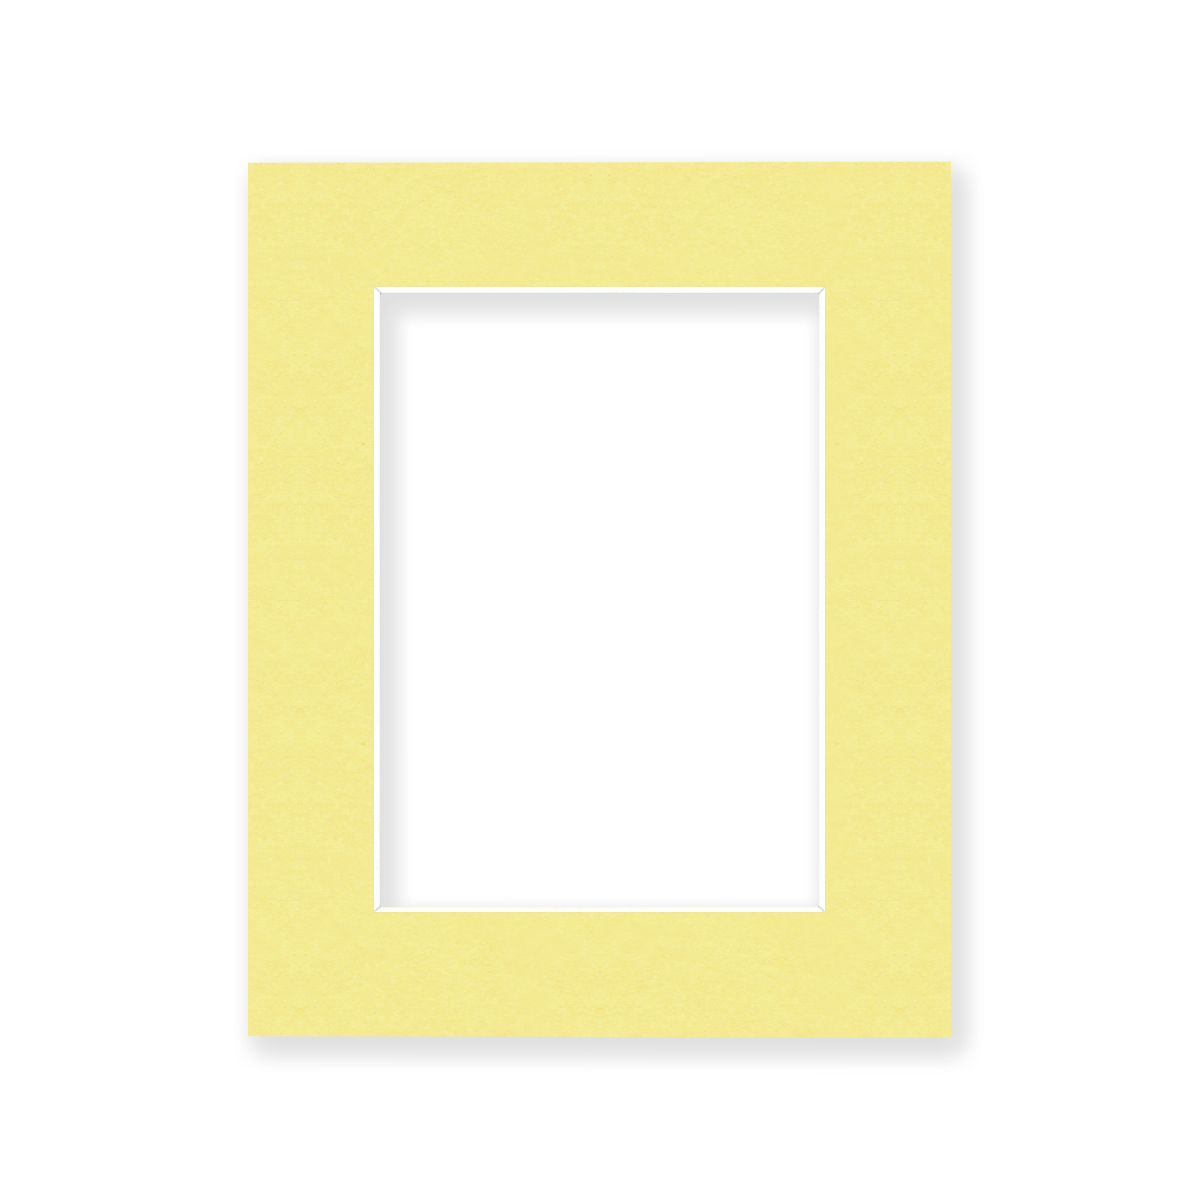 5x7 Mat for 8x10 Frame - Precut Mat Board Acid-Free Metallic Gold 5x7 Photo  Matte Made to Fit a 8x10 Picture Frame, Premium Matboard for Family